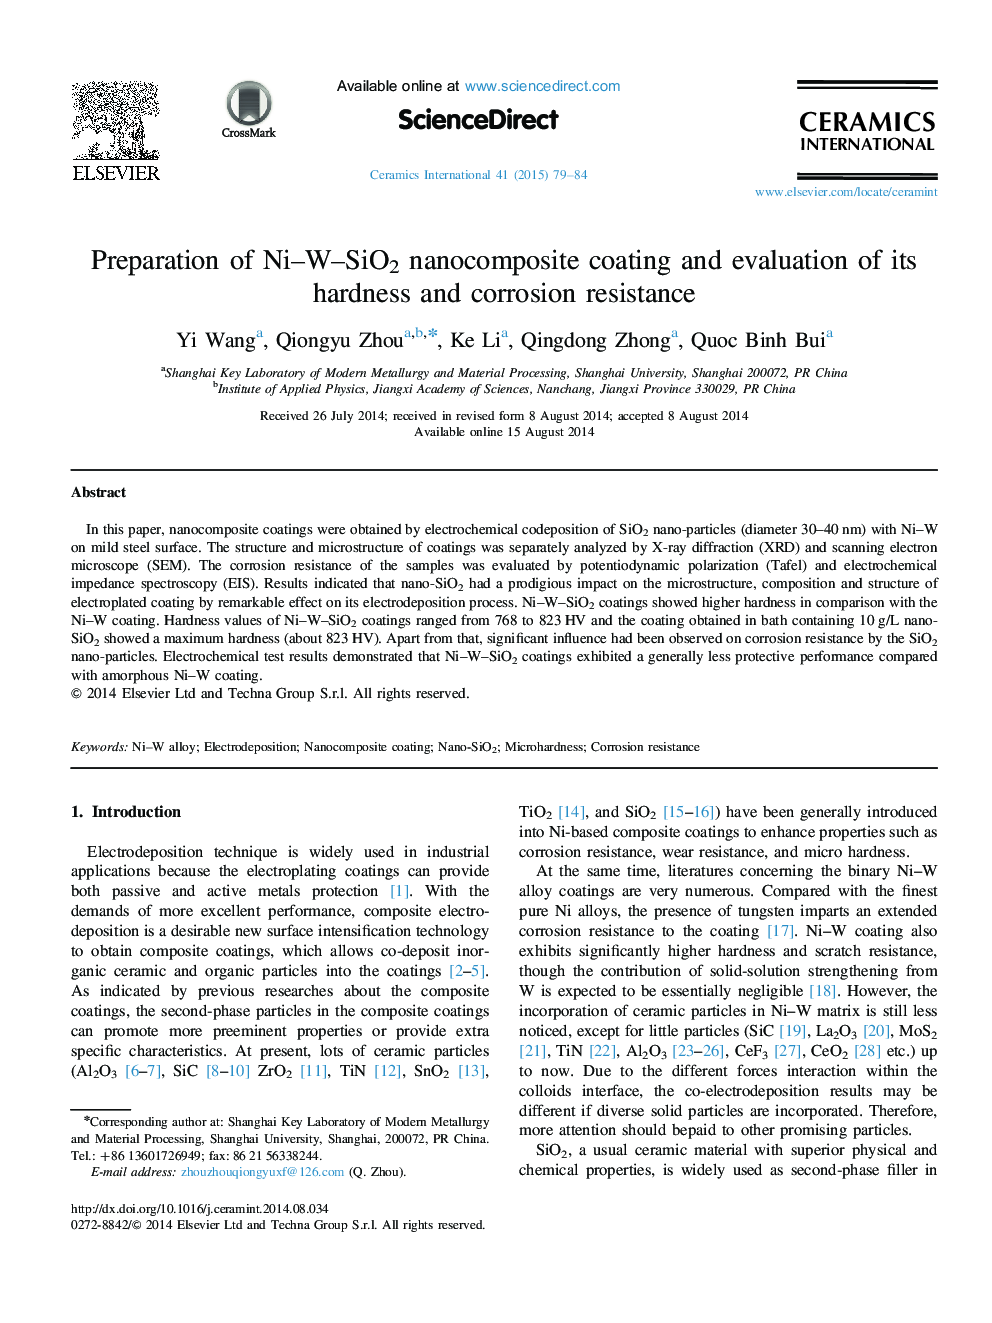 Preparation of Ni–W–SiO2 nanocomposite coating and evaluation of its hardness and corrosion resistance